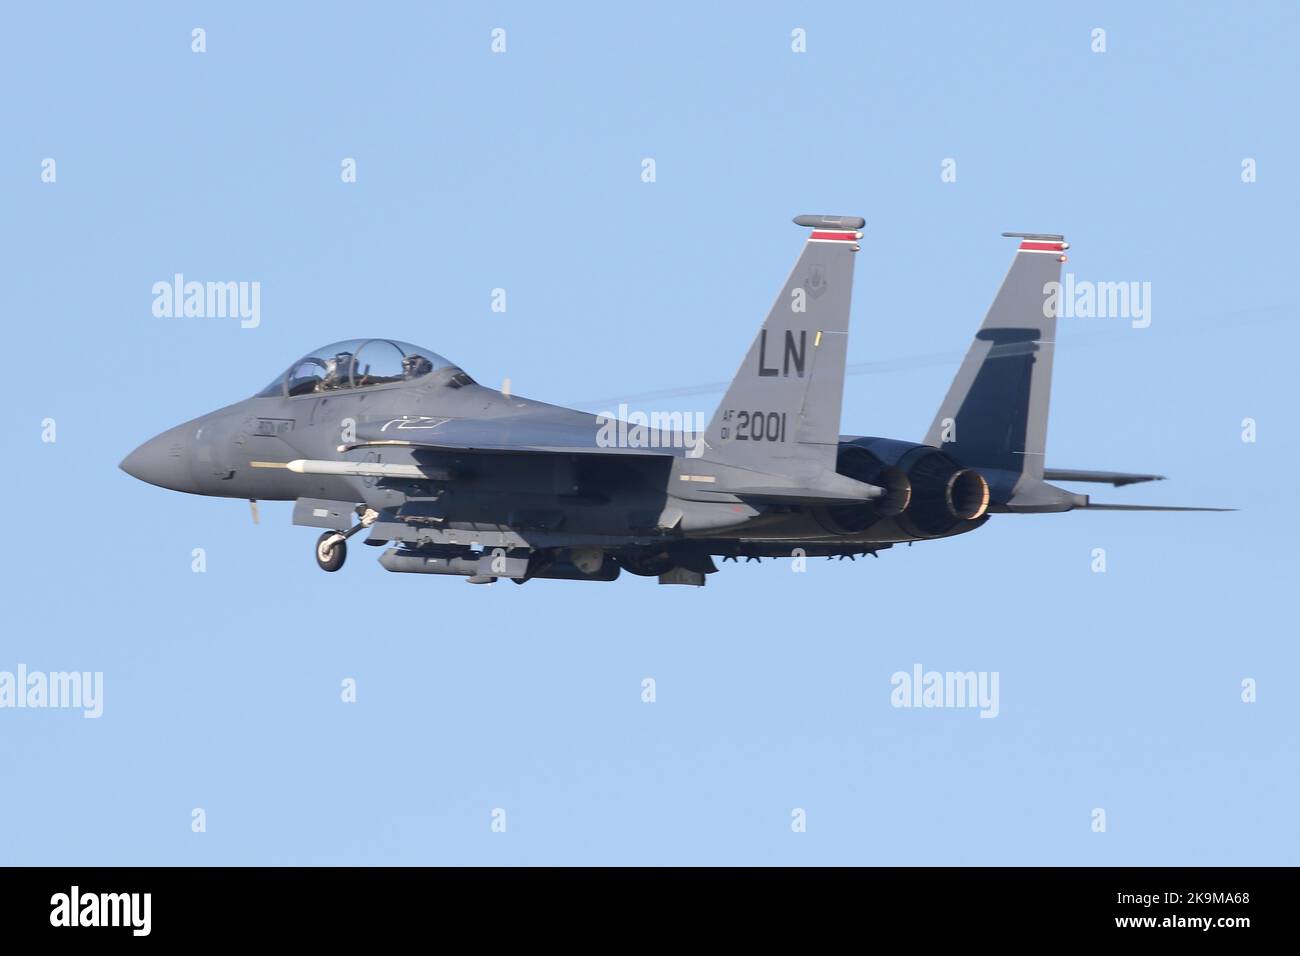 F-15E from the 48th Fighter Wing at RAF Lakenheath overshooting the runway. Stock Photo